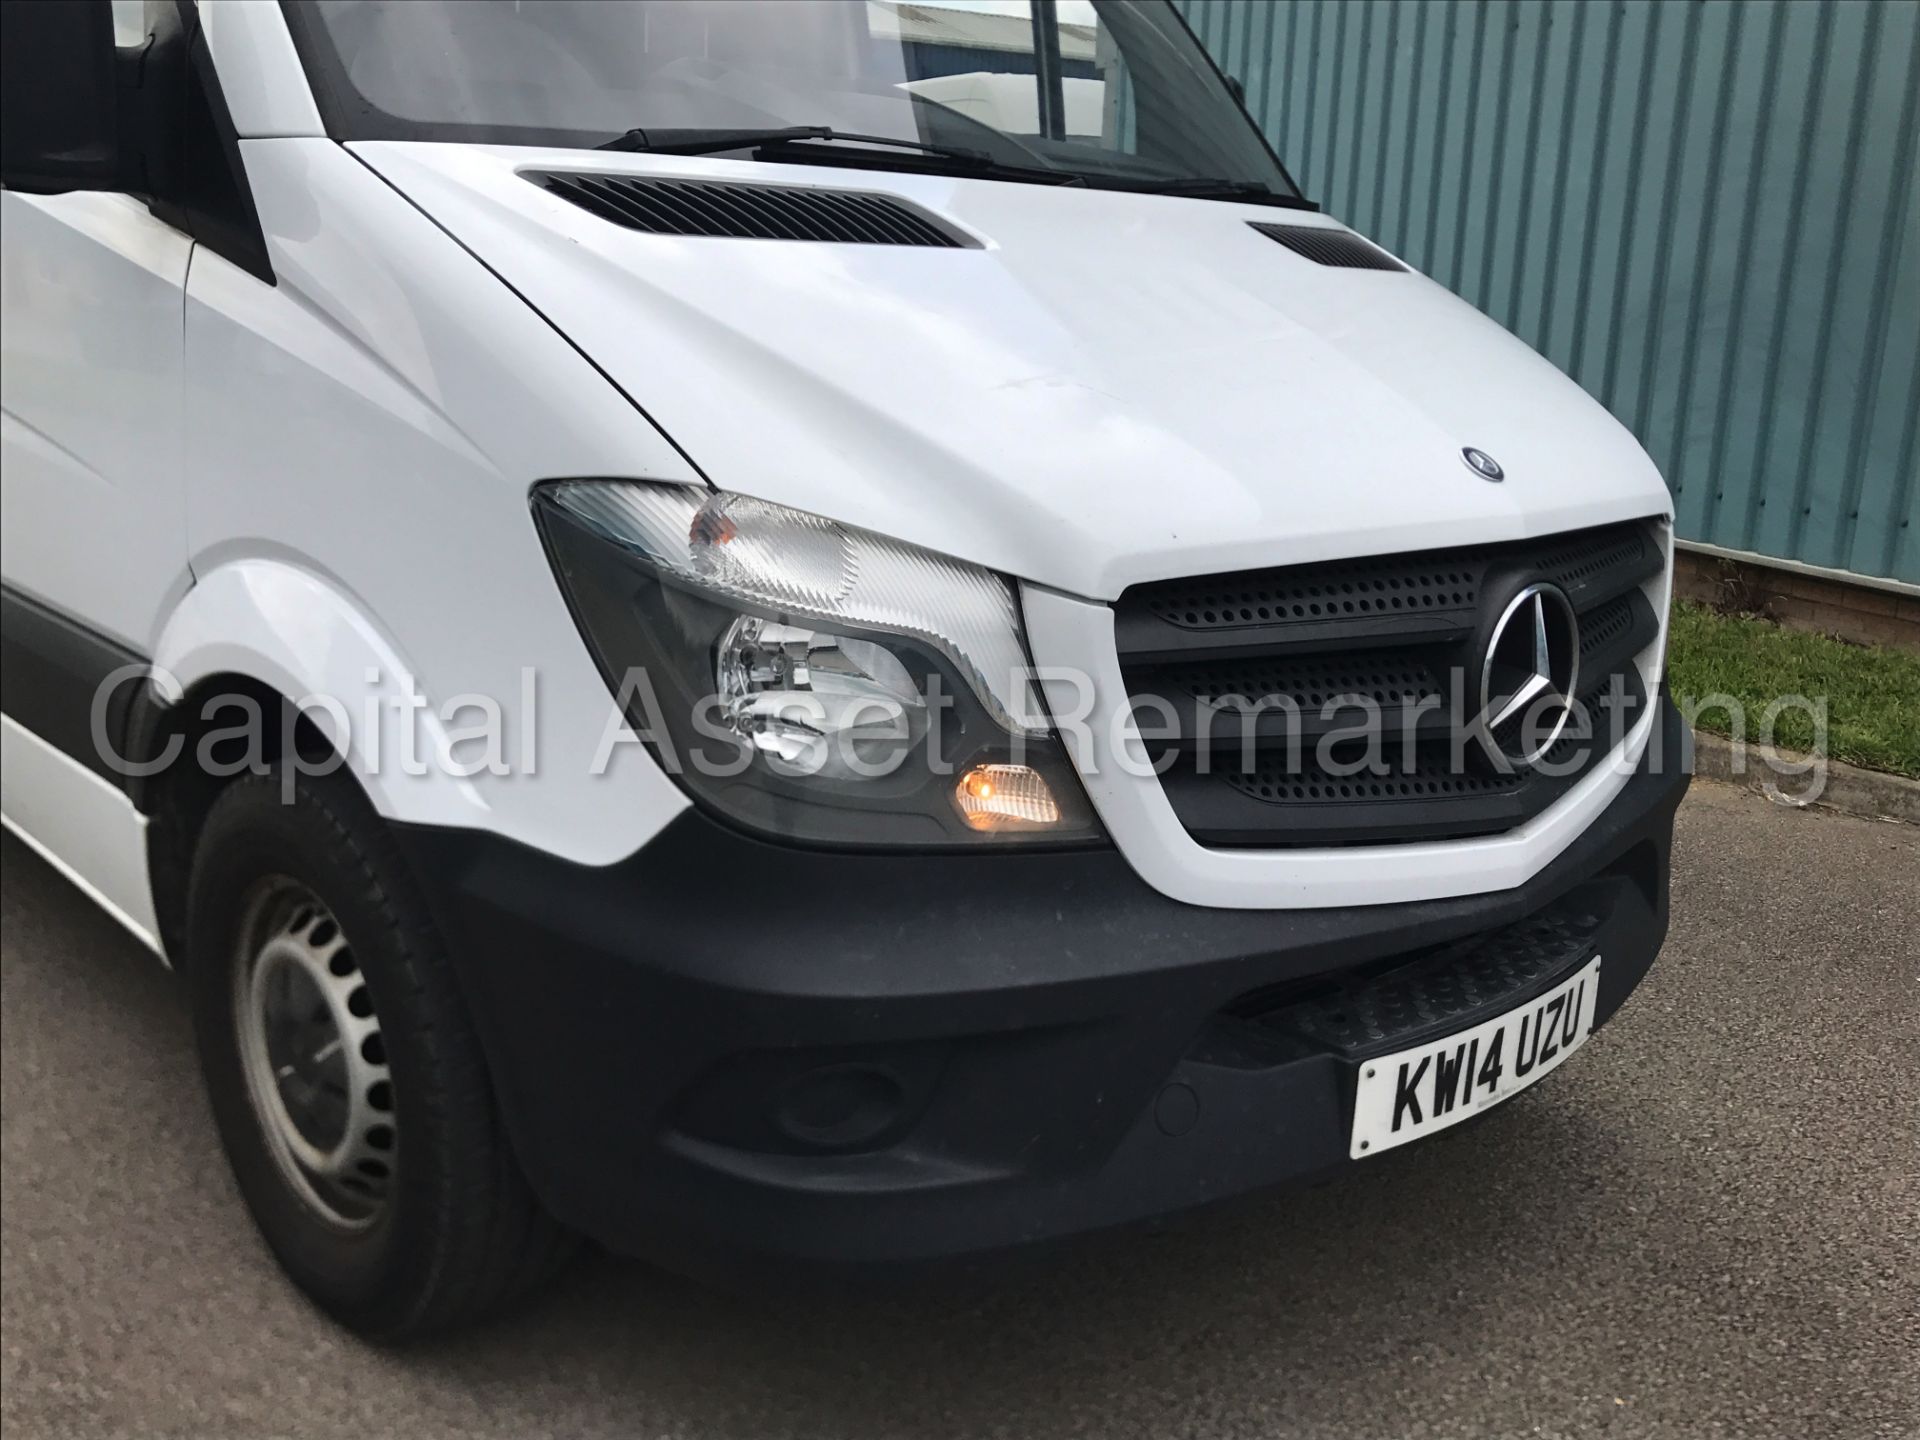 MERCEDES-BENZ SPRINTER 313 CDI 'MWB HI-ROOF' (2014) '130 BHP - 6 SPEED' (1 COMPANY OWNER FROM NEW) - Image 11 of 22